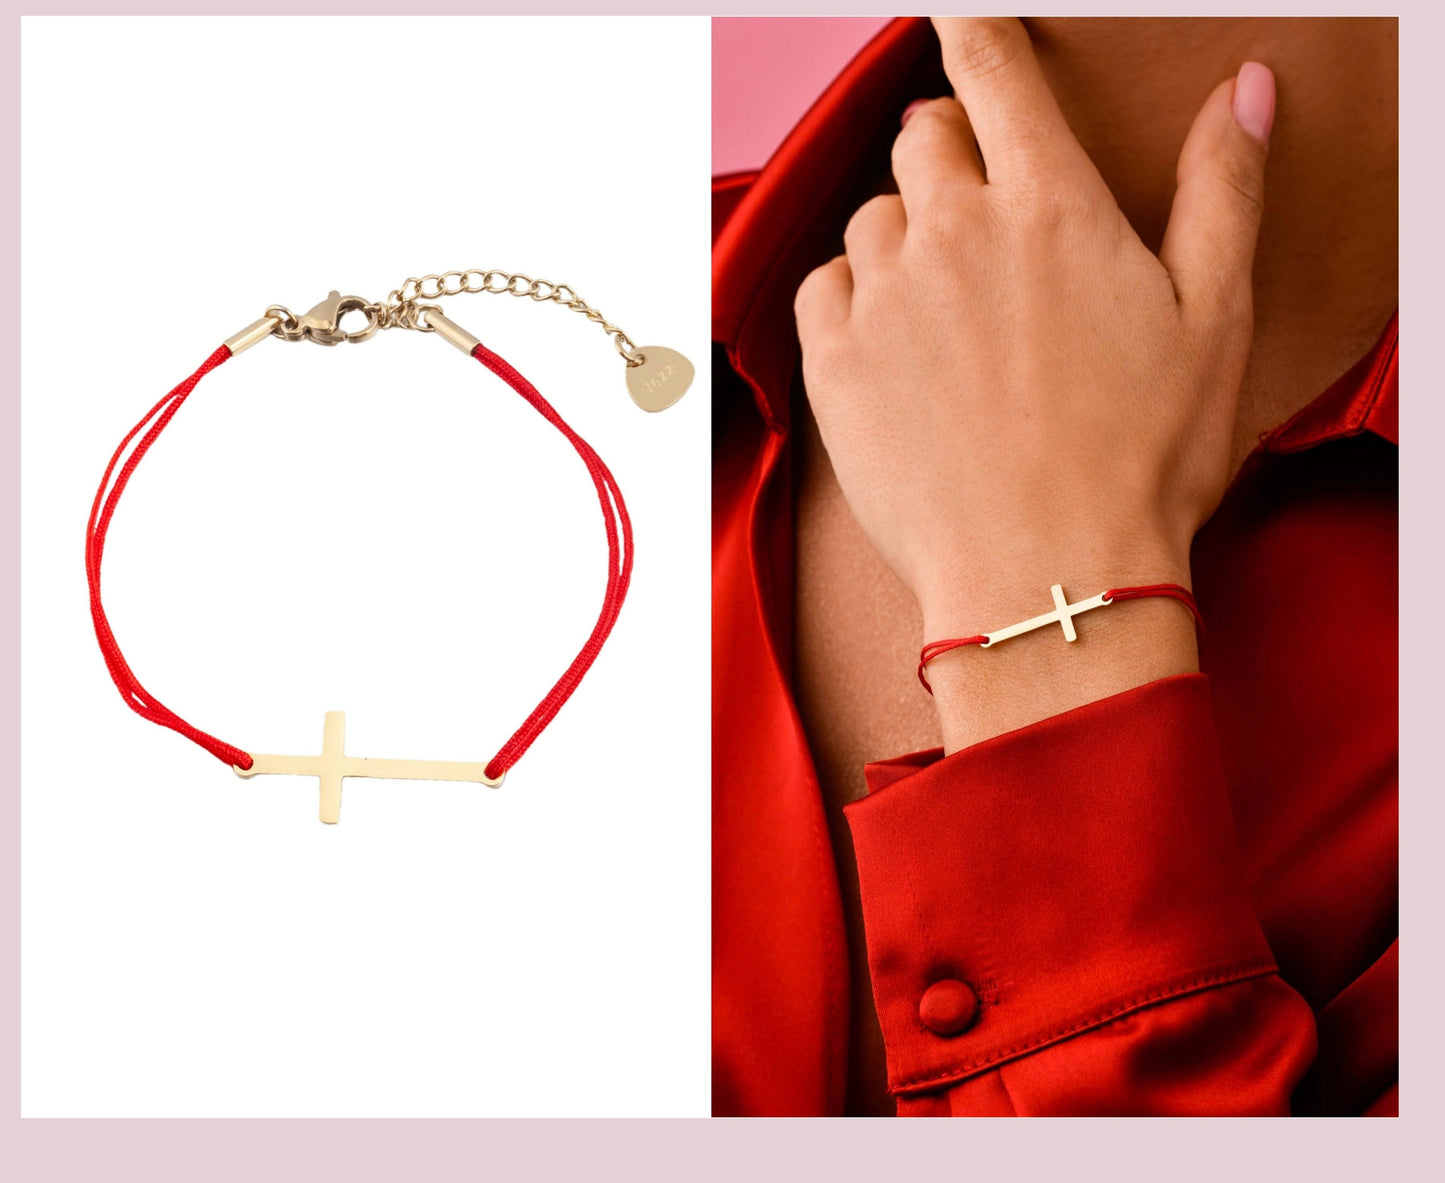 Red String Bracelet with Gold Plated Cross